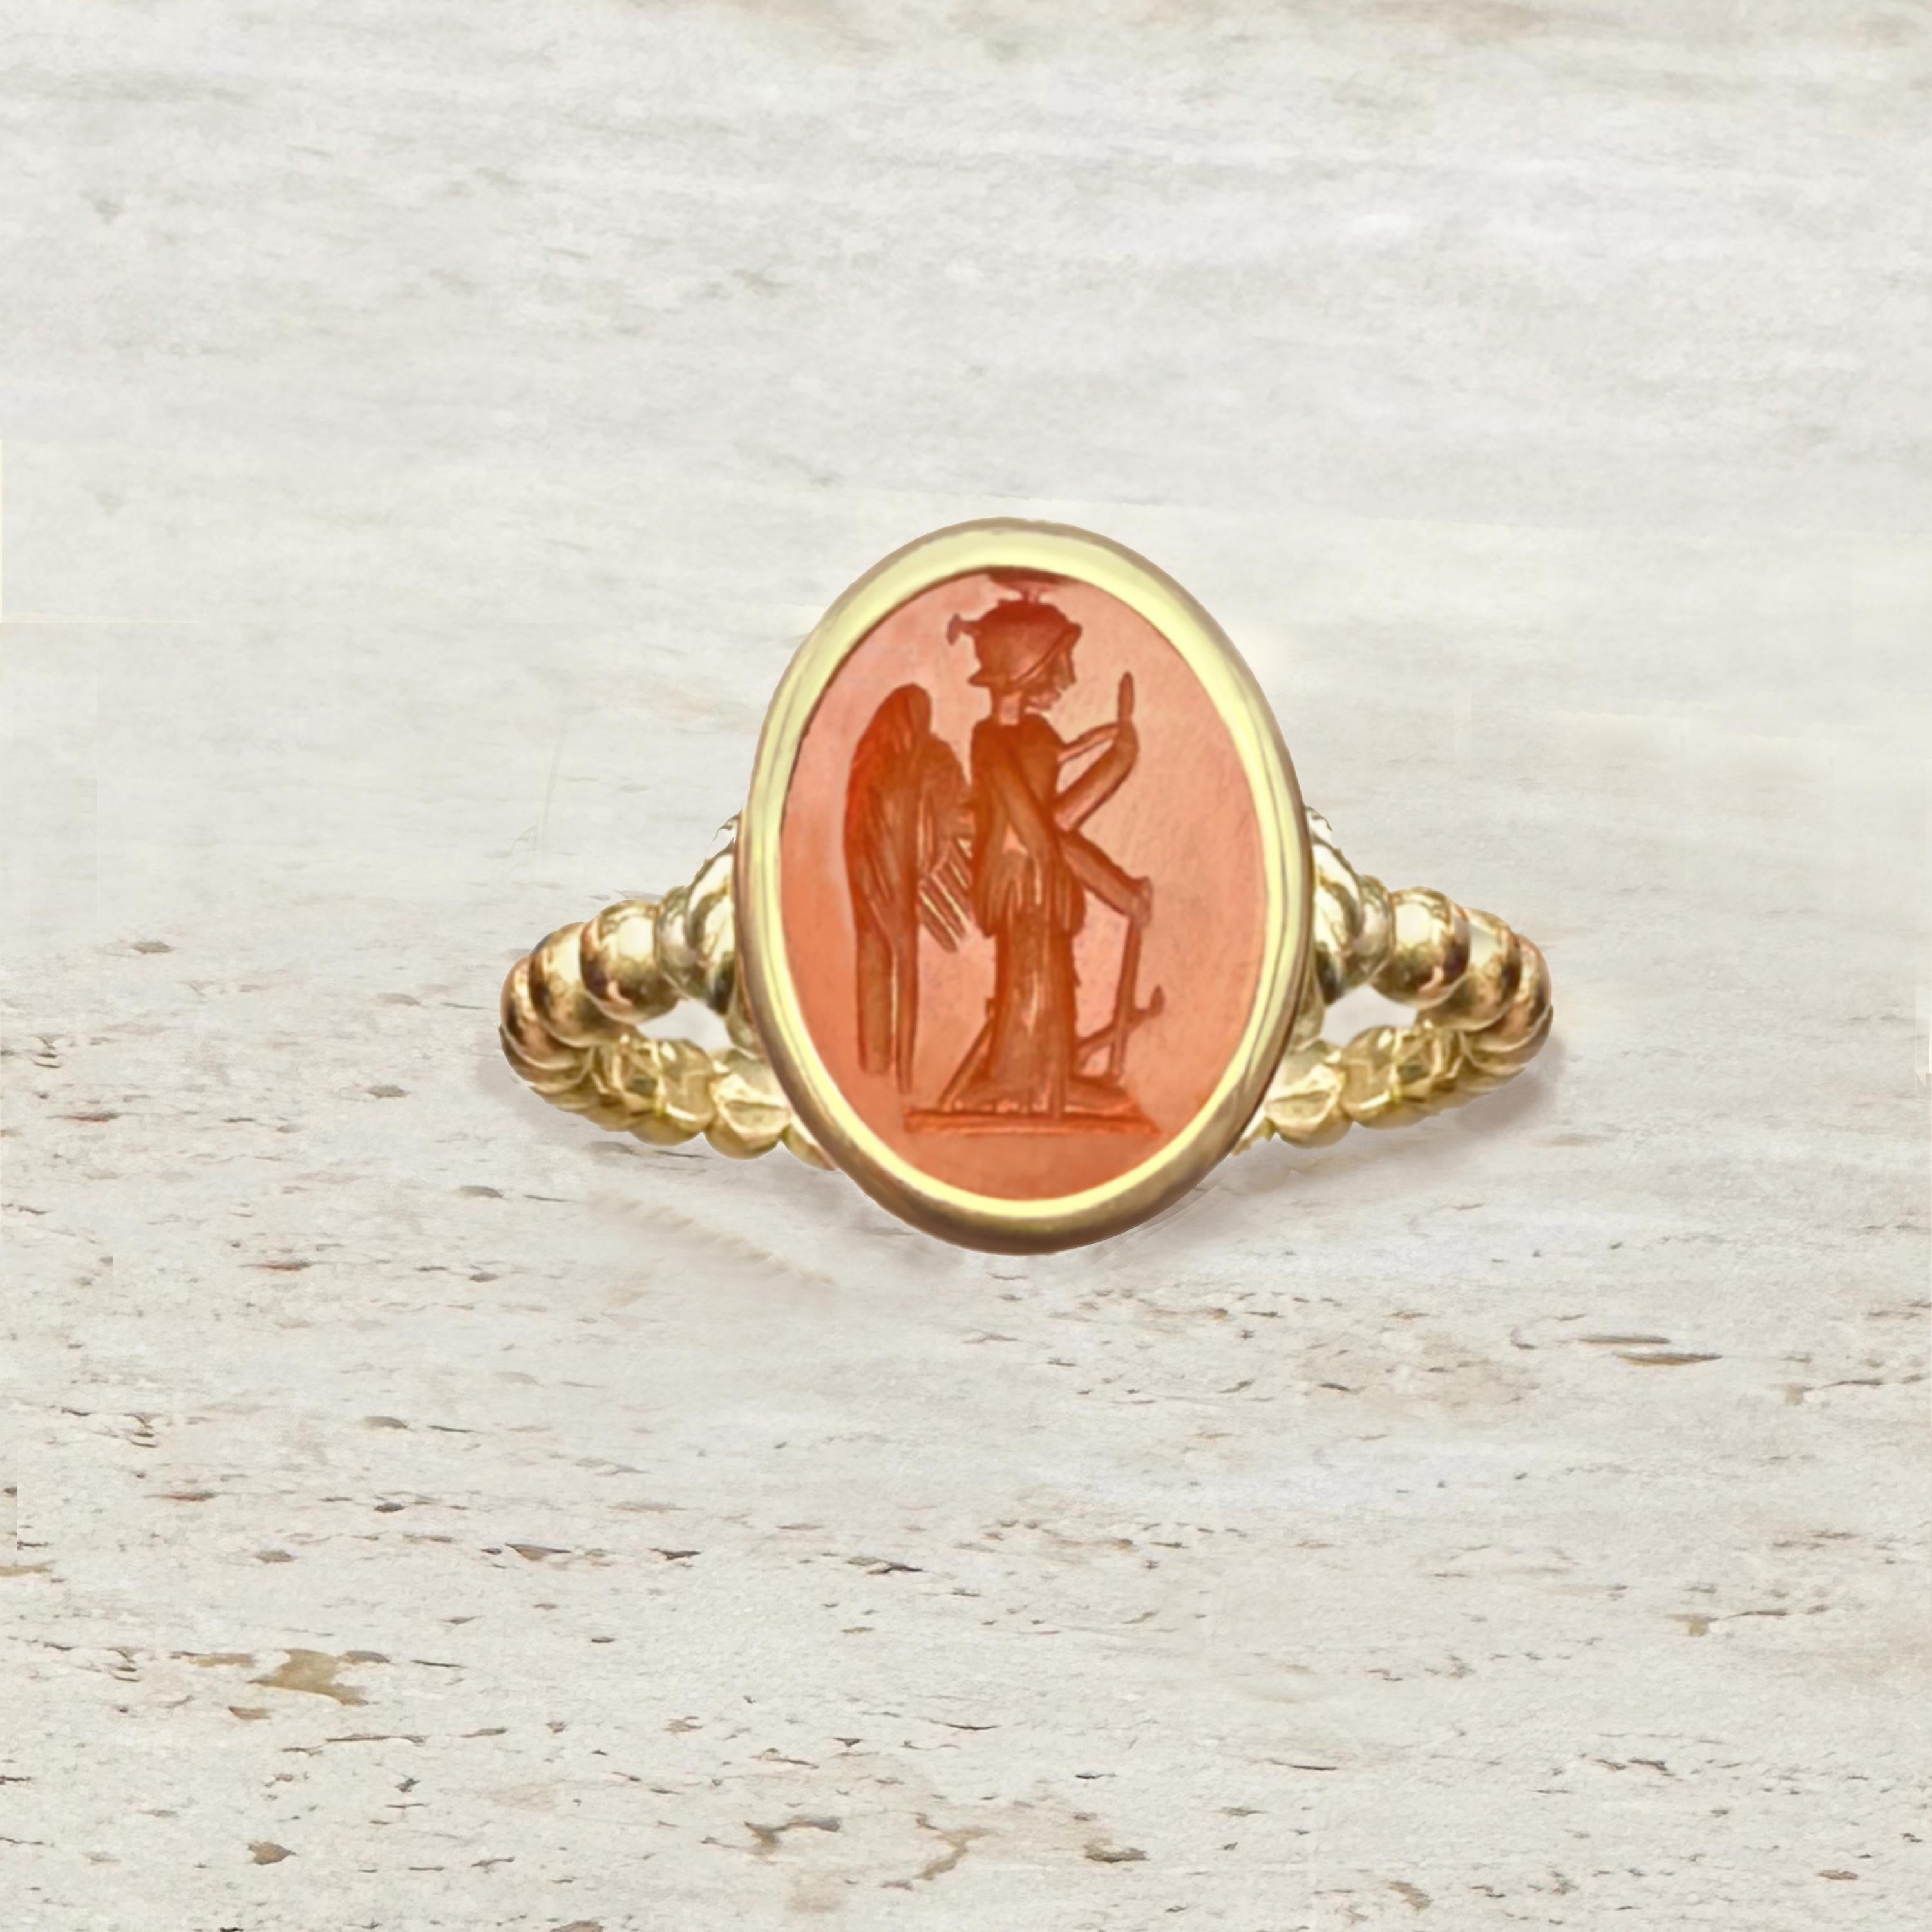 Classical Roman Genuine Roman intaglio 1st-2nd cent. AD 18 kt Gold Ring depicting Goddess Athena For Sale